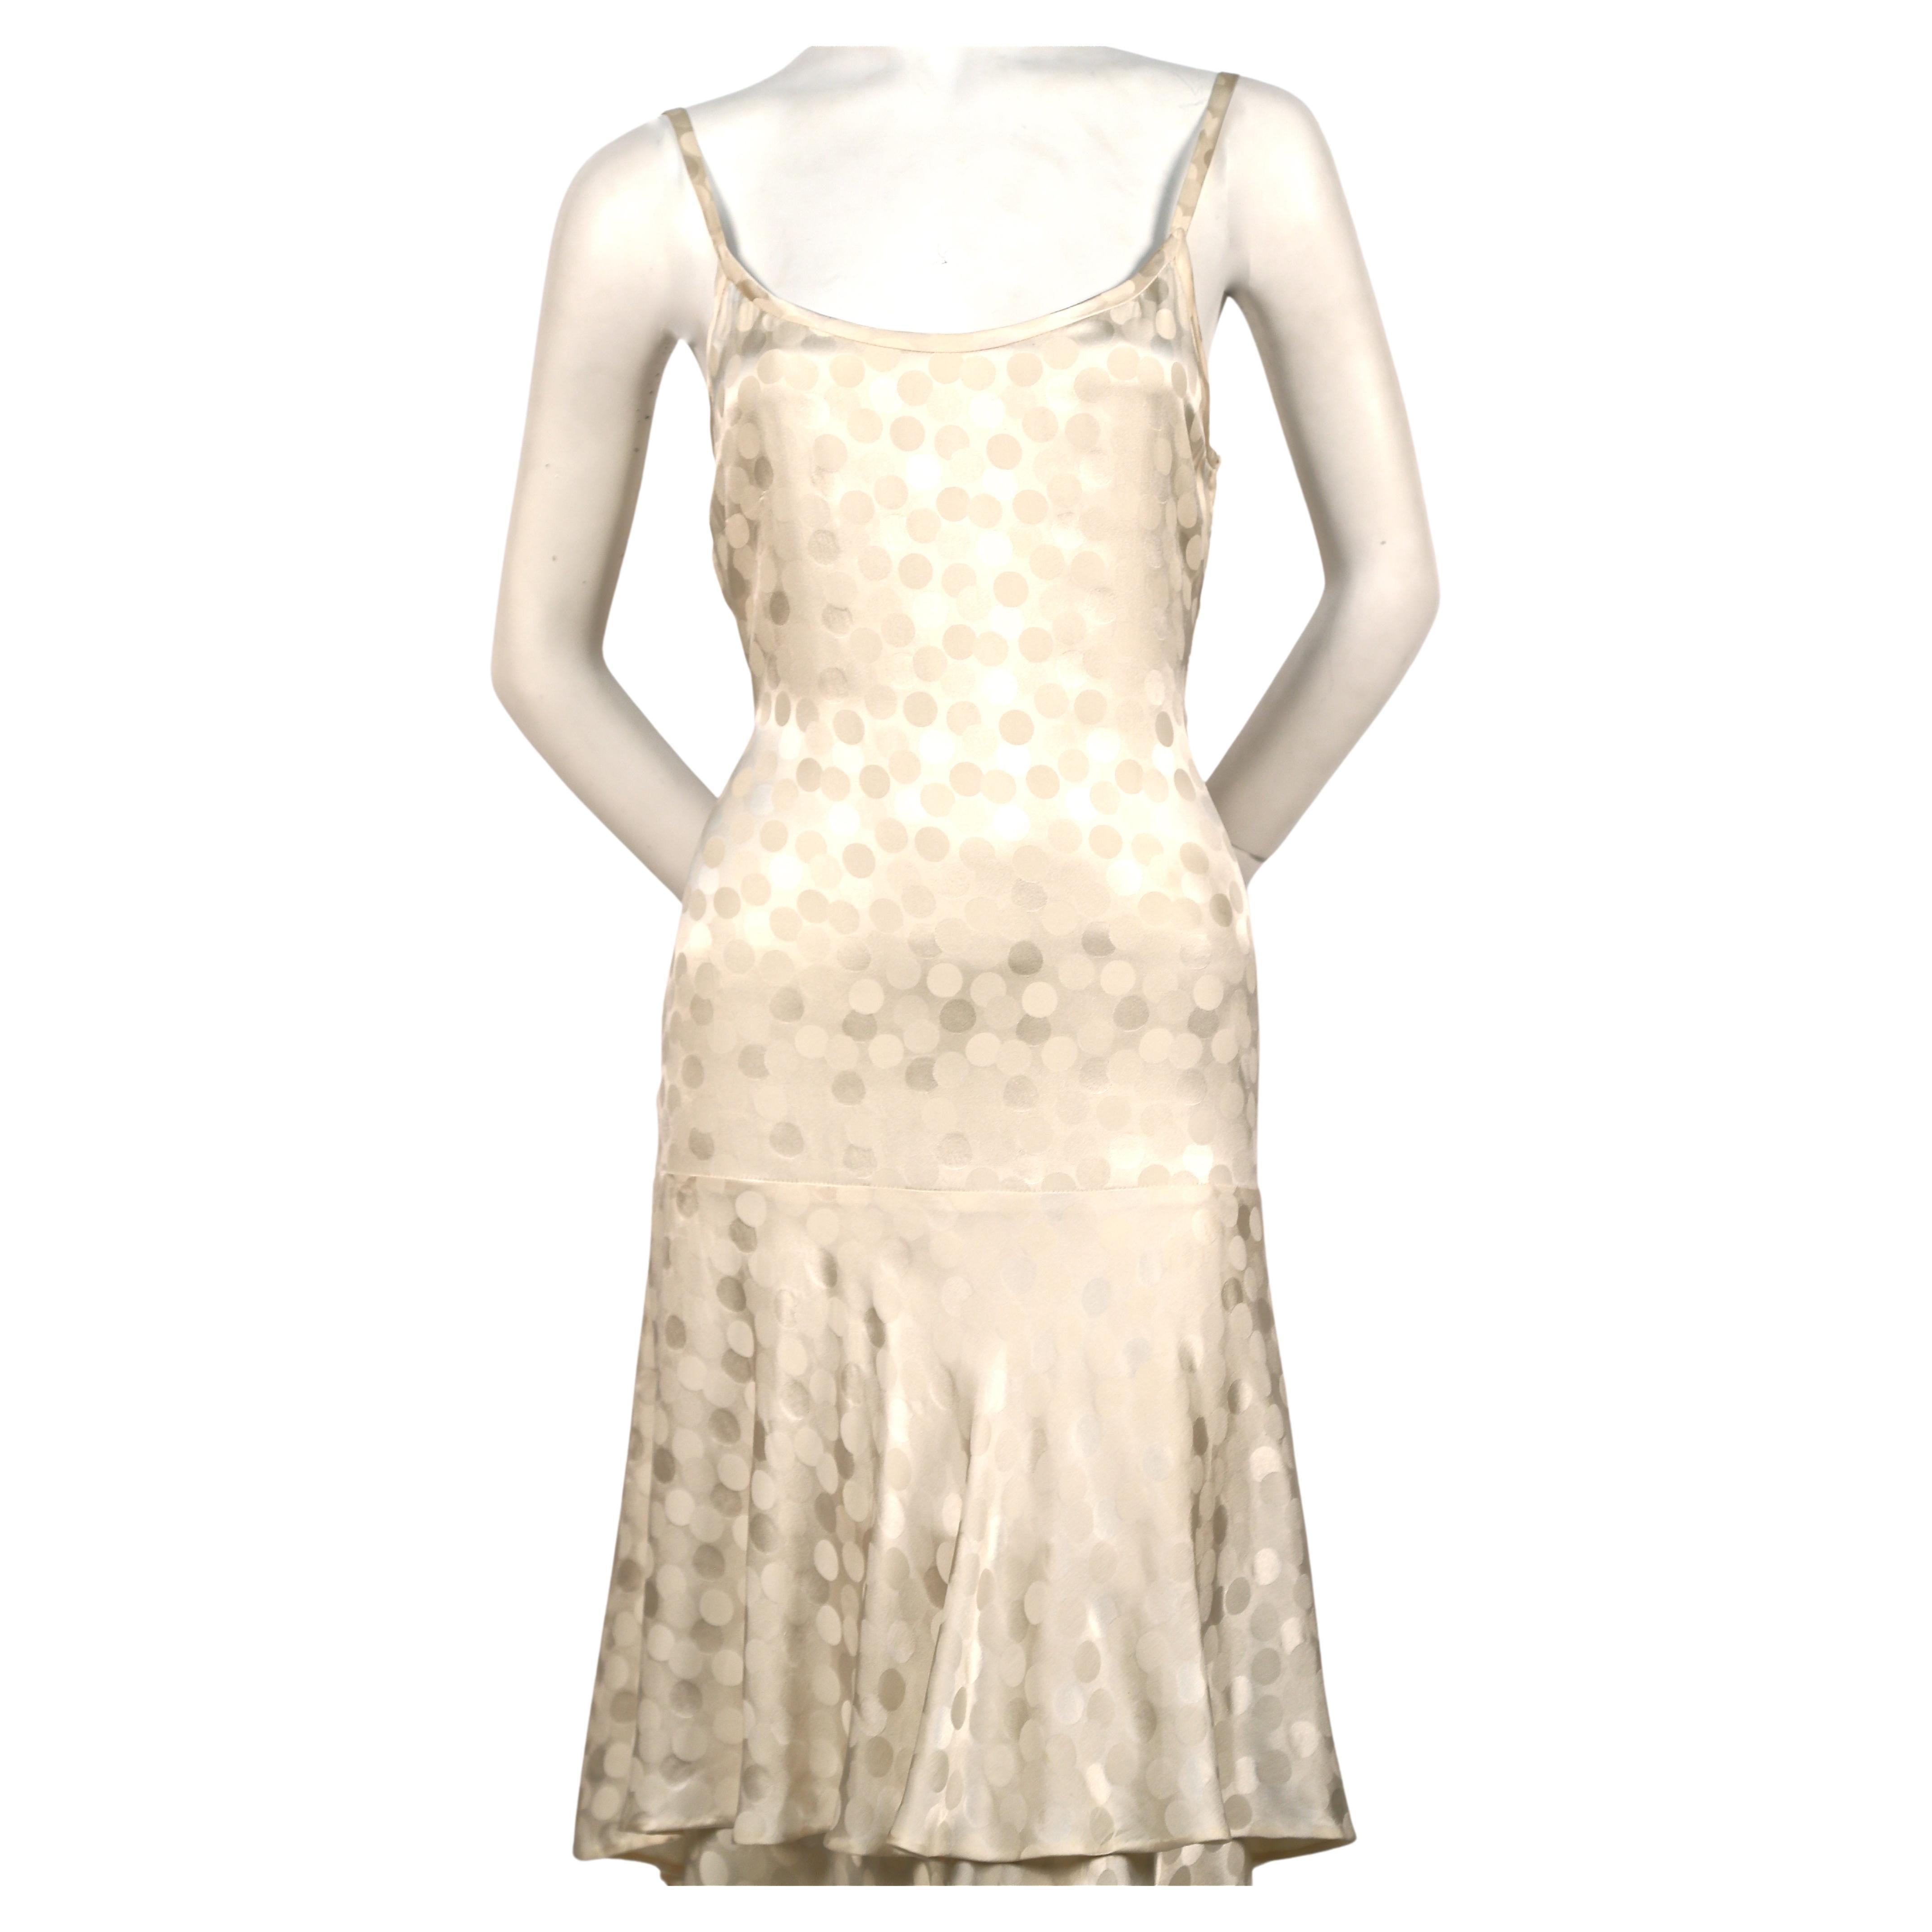 Very rare, stunning haute couture dress made of cream silk damask with subtle overlapping dot weave and tiered high/low hemline designed by Yves Saint Laurent dating to the 1970's. Dress would be great as a Wedding gown. Color is a light cream with